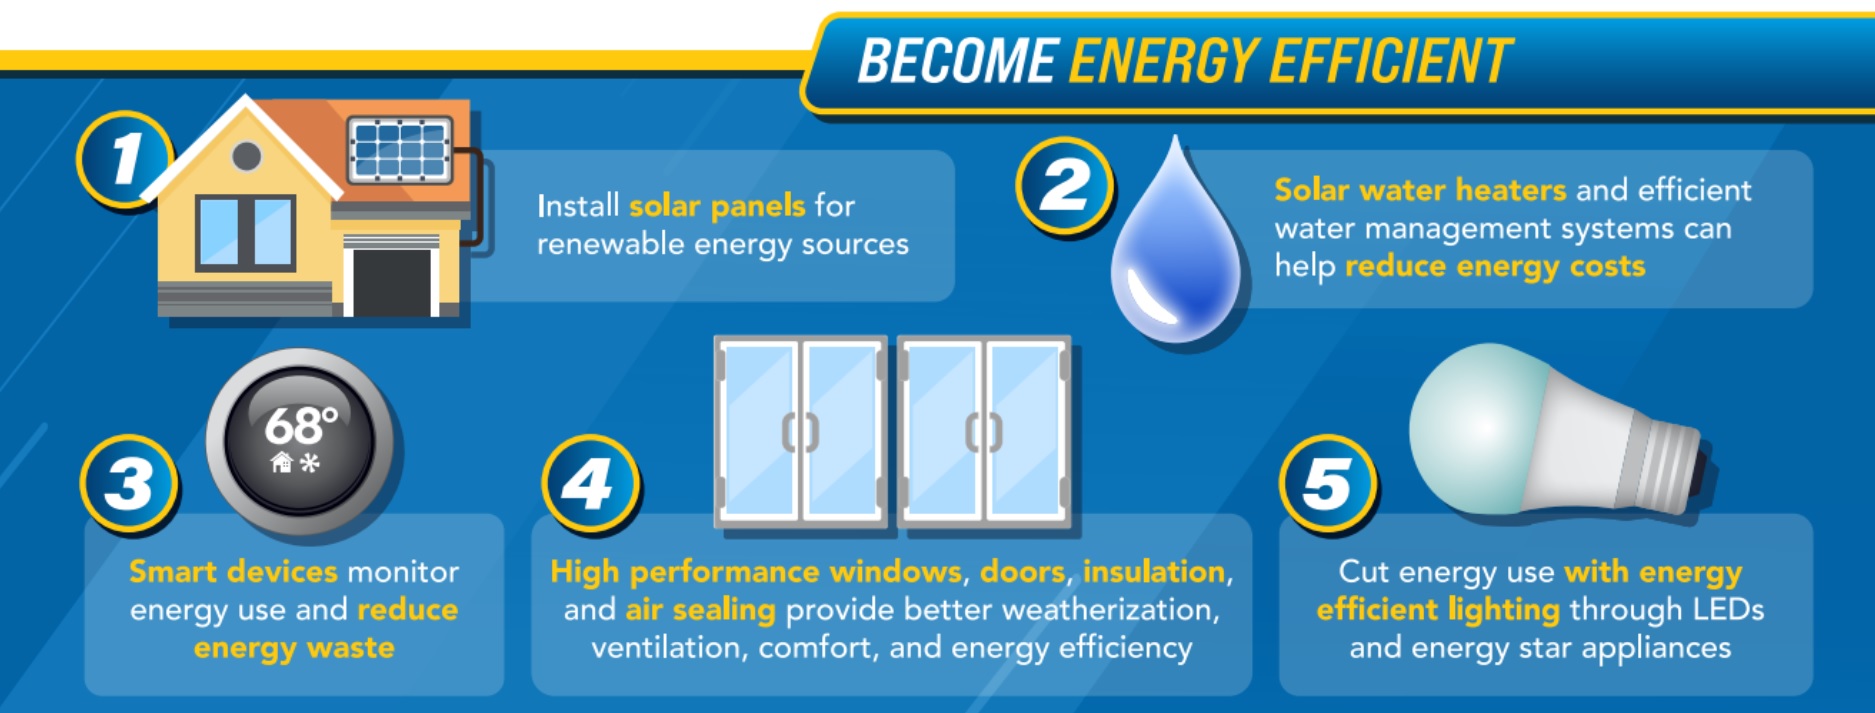 Steps shown to becoming energy efficient.